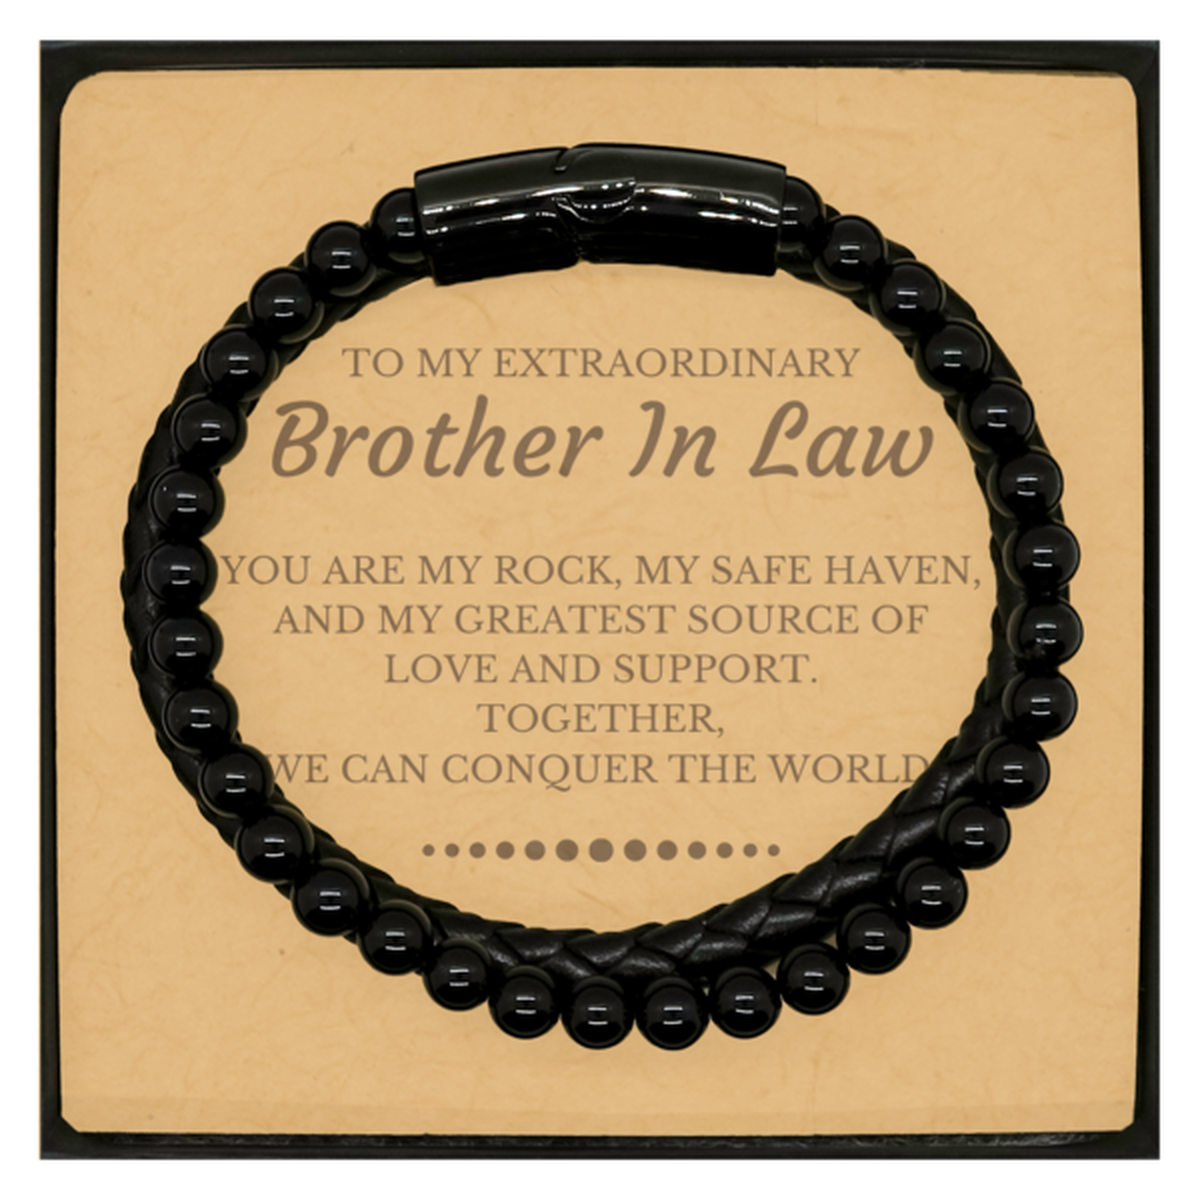 To My Extraordinary Brother In Law Gifts, Together, we can conquer the world, Birthday Christmas Stone Leather Bracelets For Brother In Law, Christmas Gifts For Brother In Law